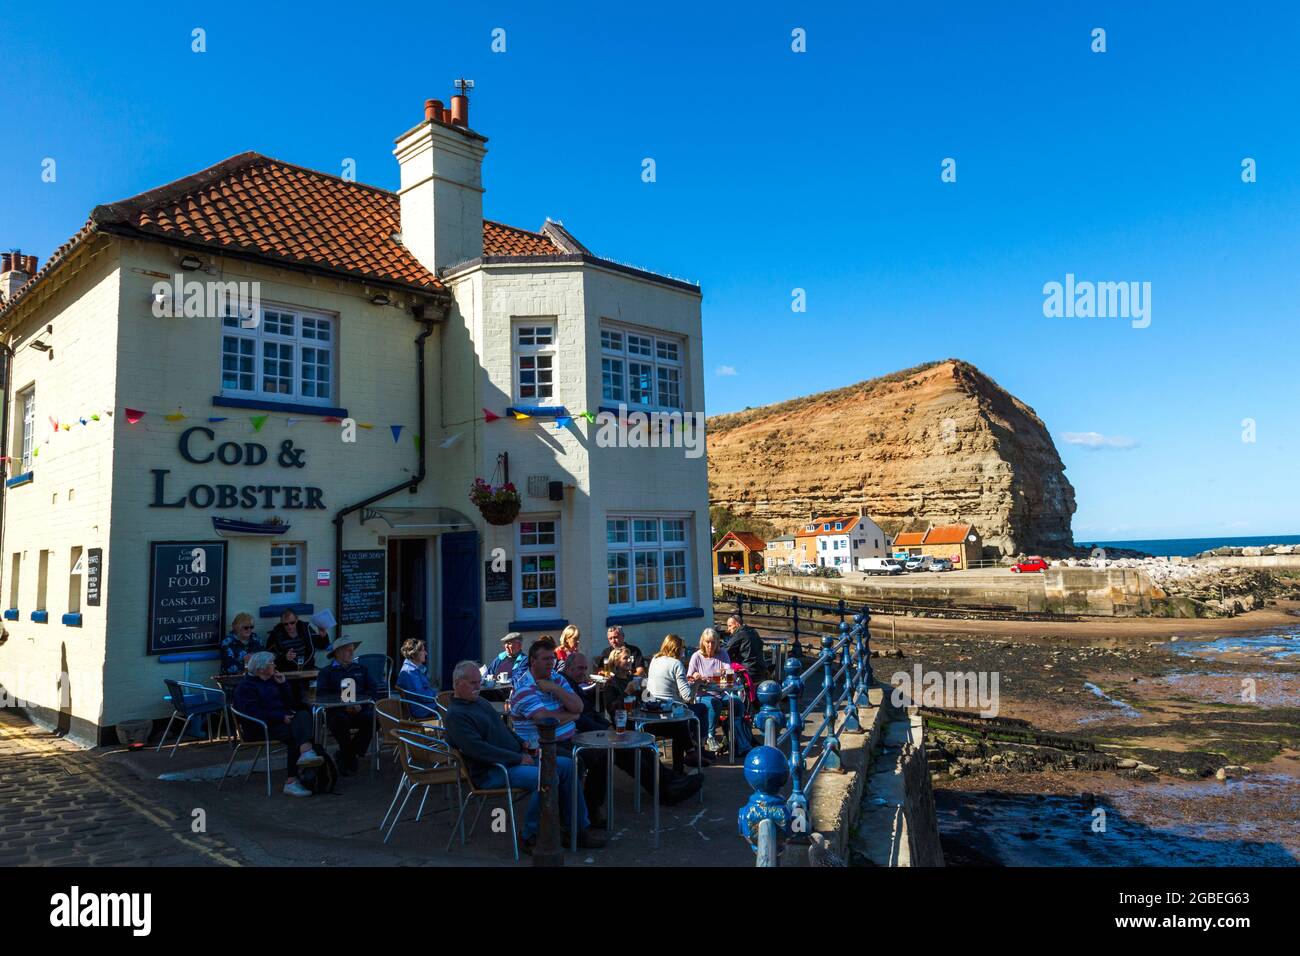 The Cod & Lobster public house overlooking the harbour in the picturesque fishing village of Staithes, North Yorkshire, England, U.K. Stock Photo